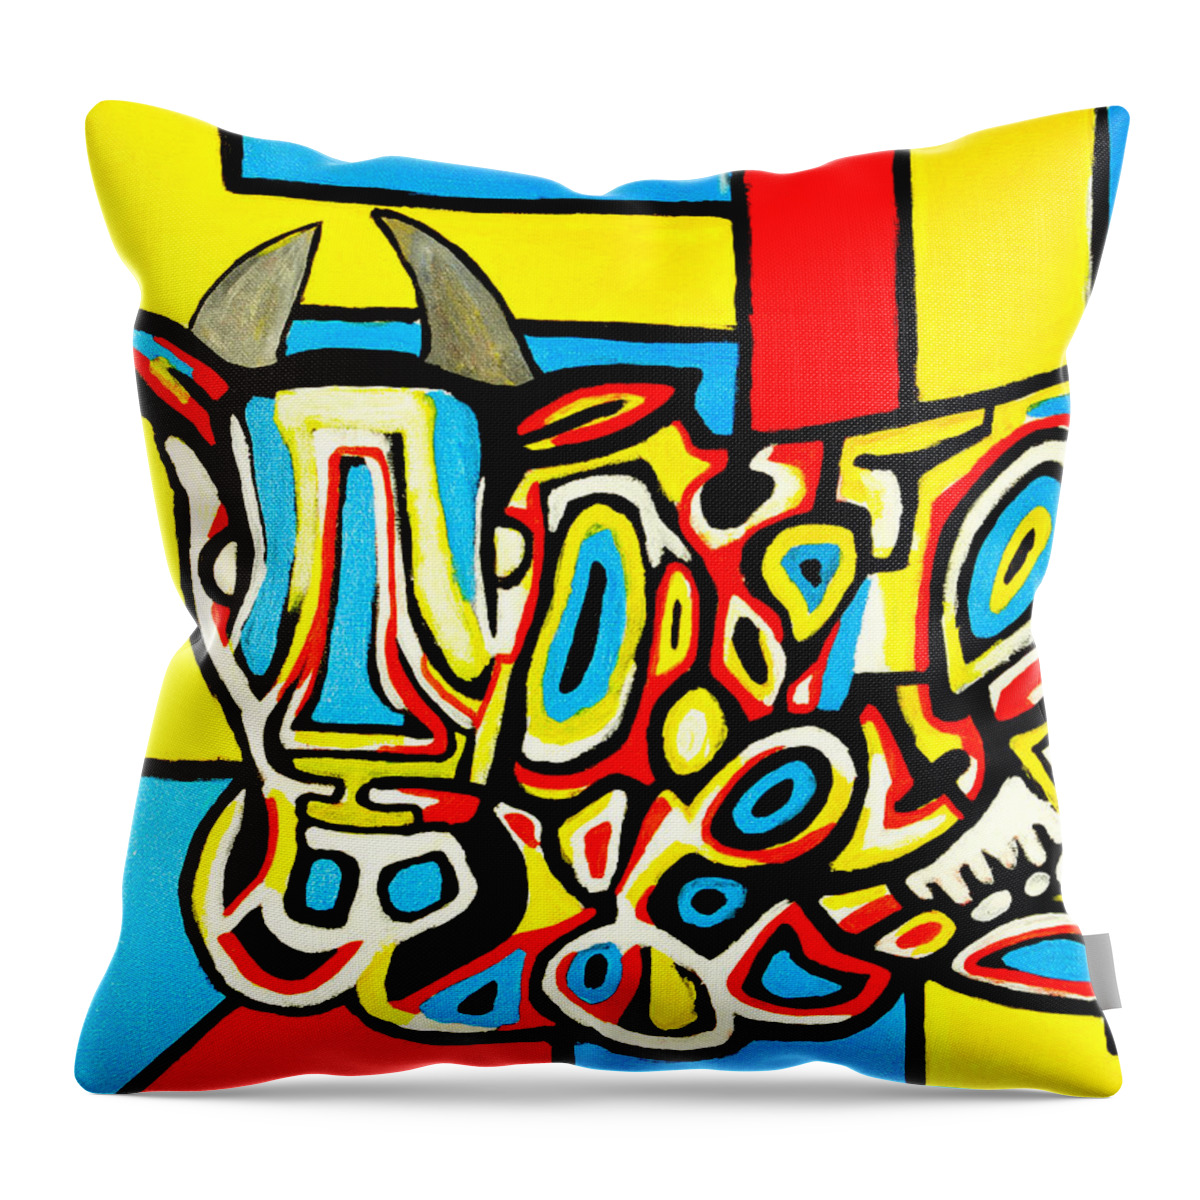 Keith Throw Pillow featuring the painting Haring's Cow by Jose Rojas